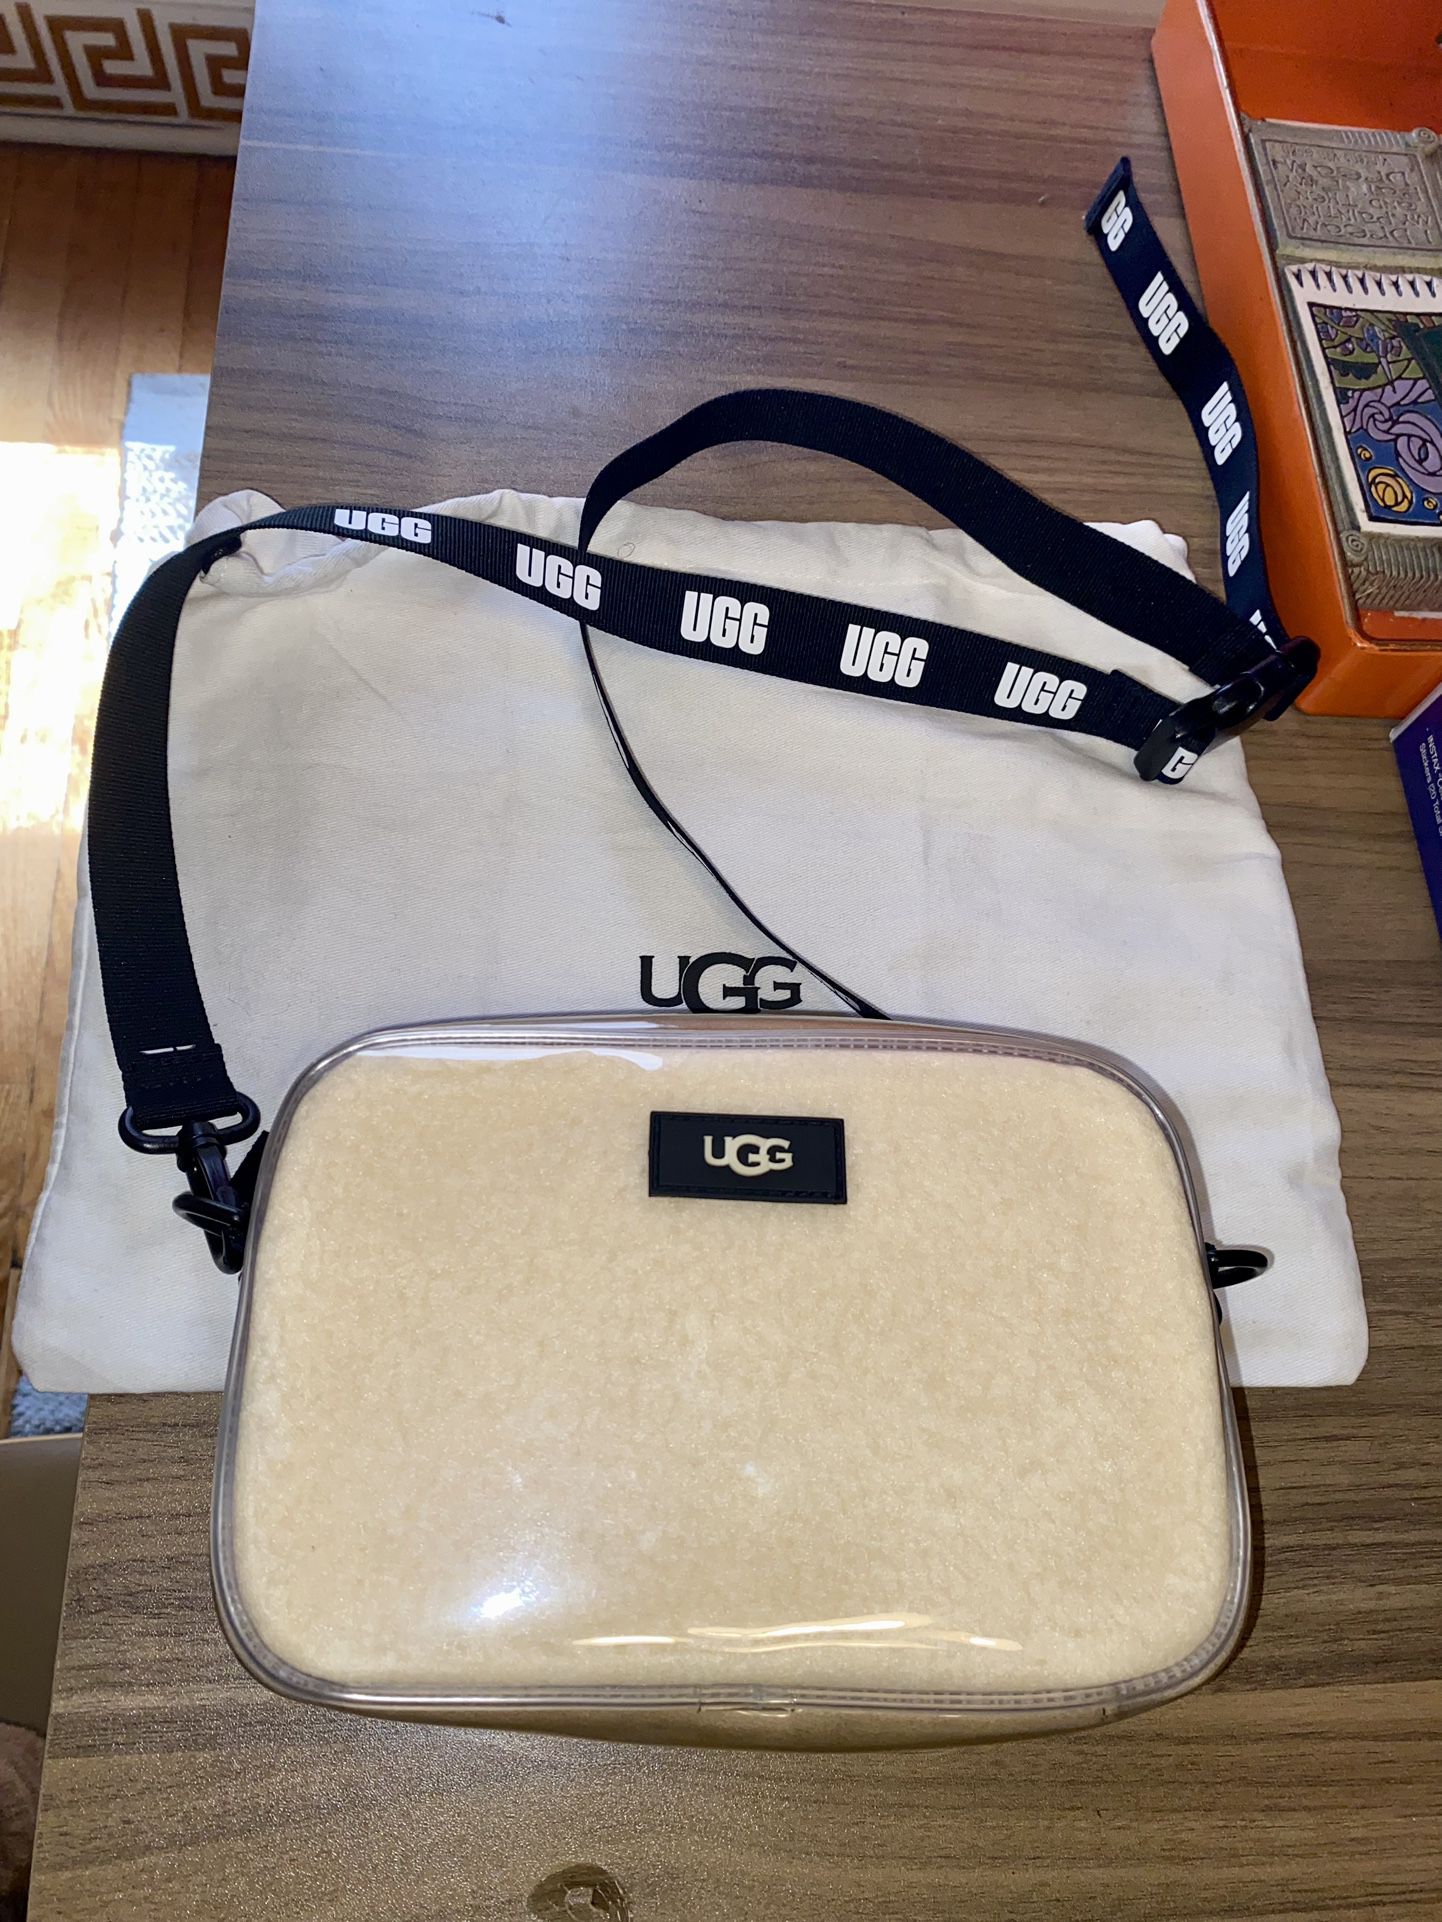 Ugg Cross Body Purse With Matching Boots